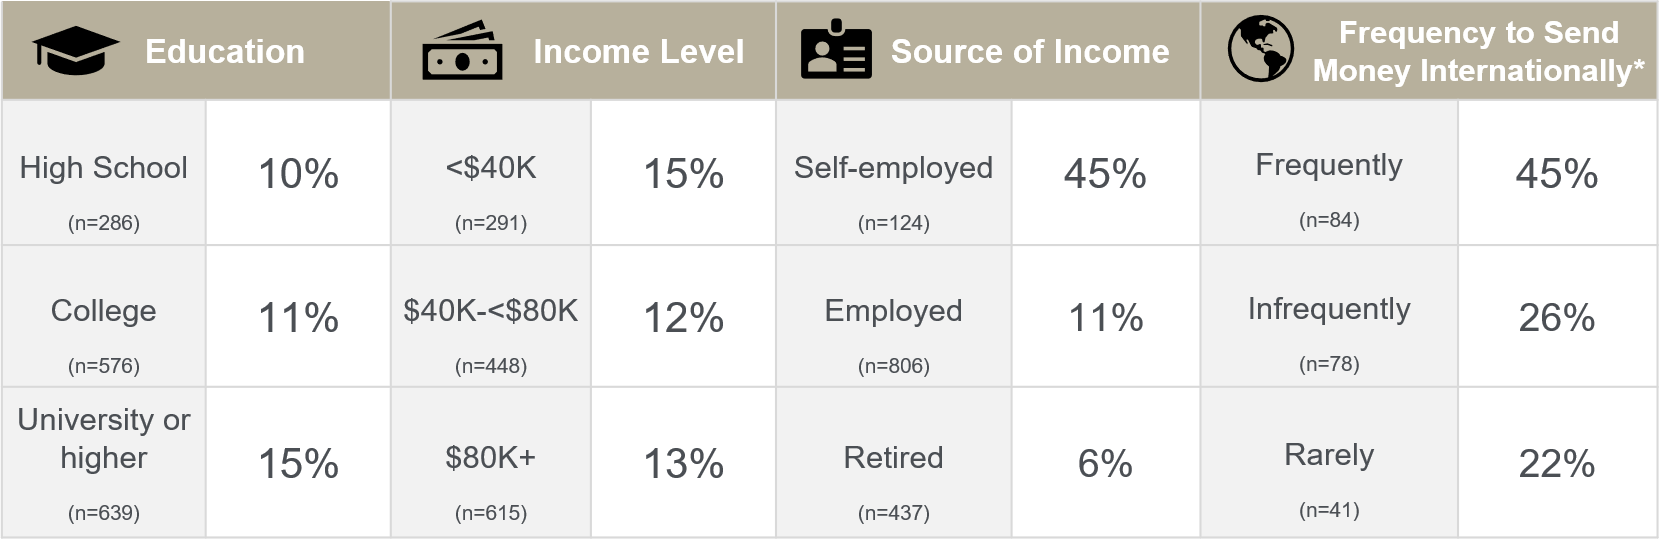 profile_of_gig_workers_-_education_and_income.png